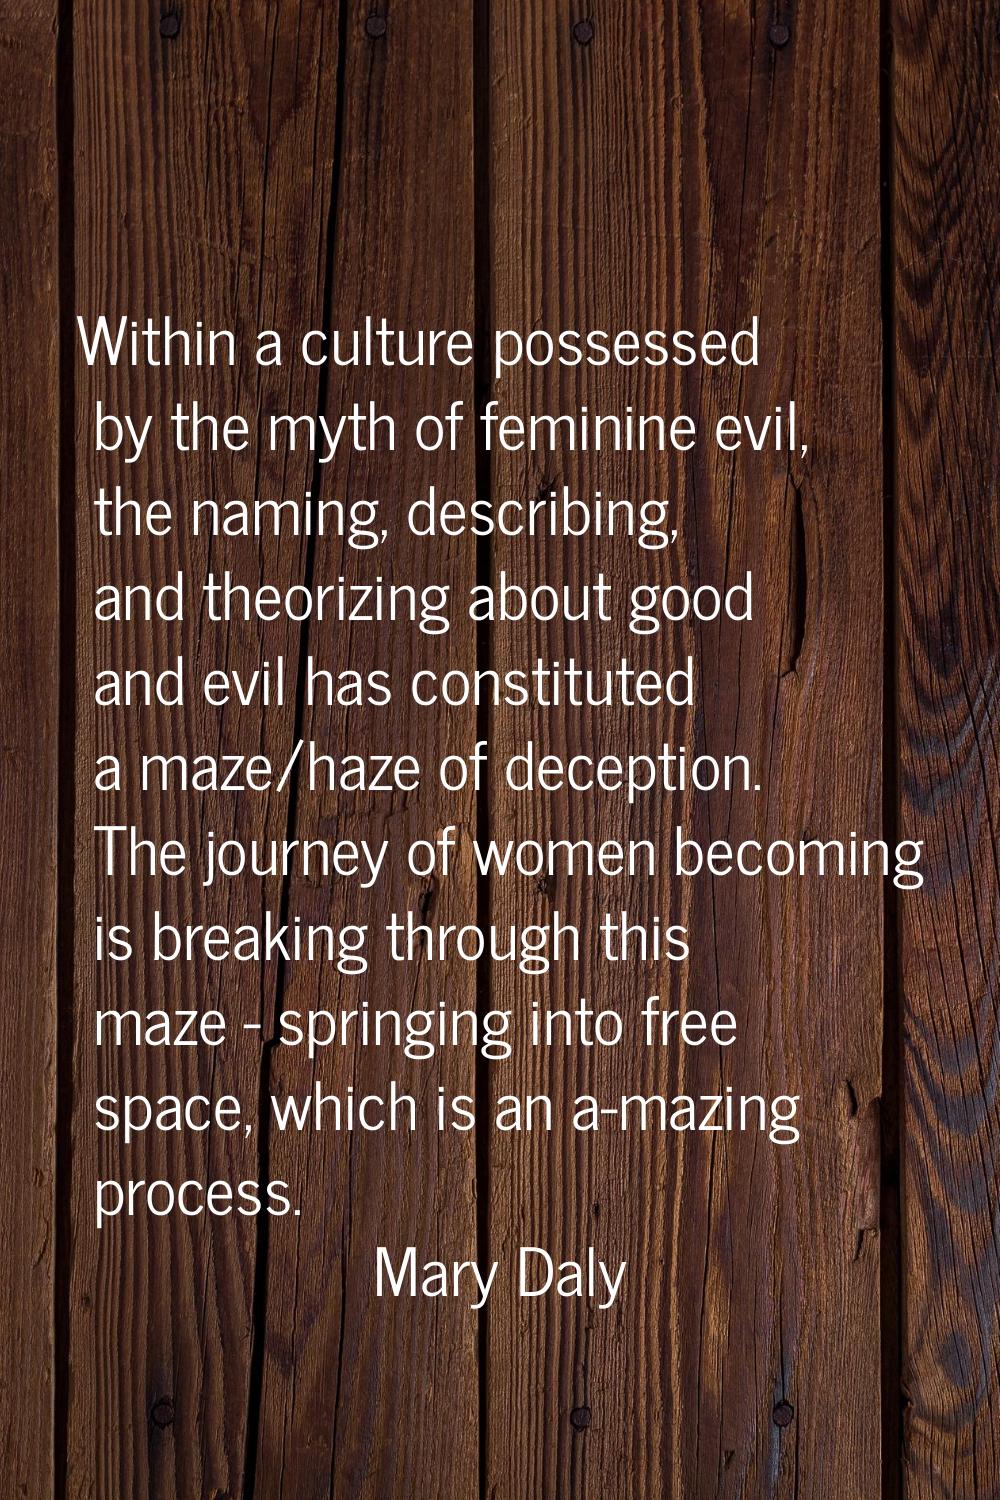 Within a culture possessed by the myth of feminine evil, the naming, describing, and theorizing abo